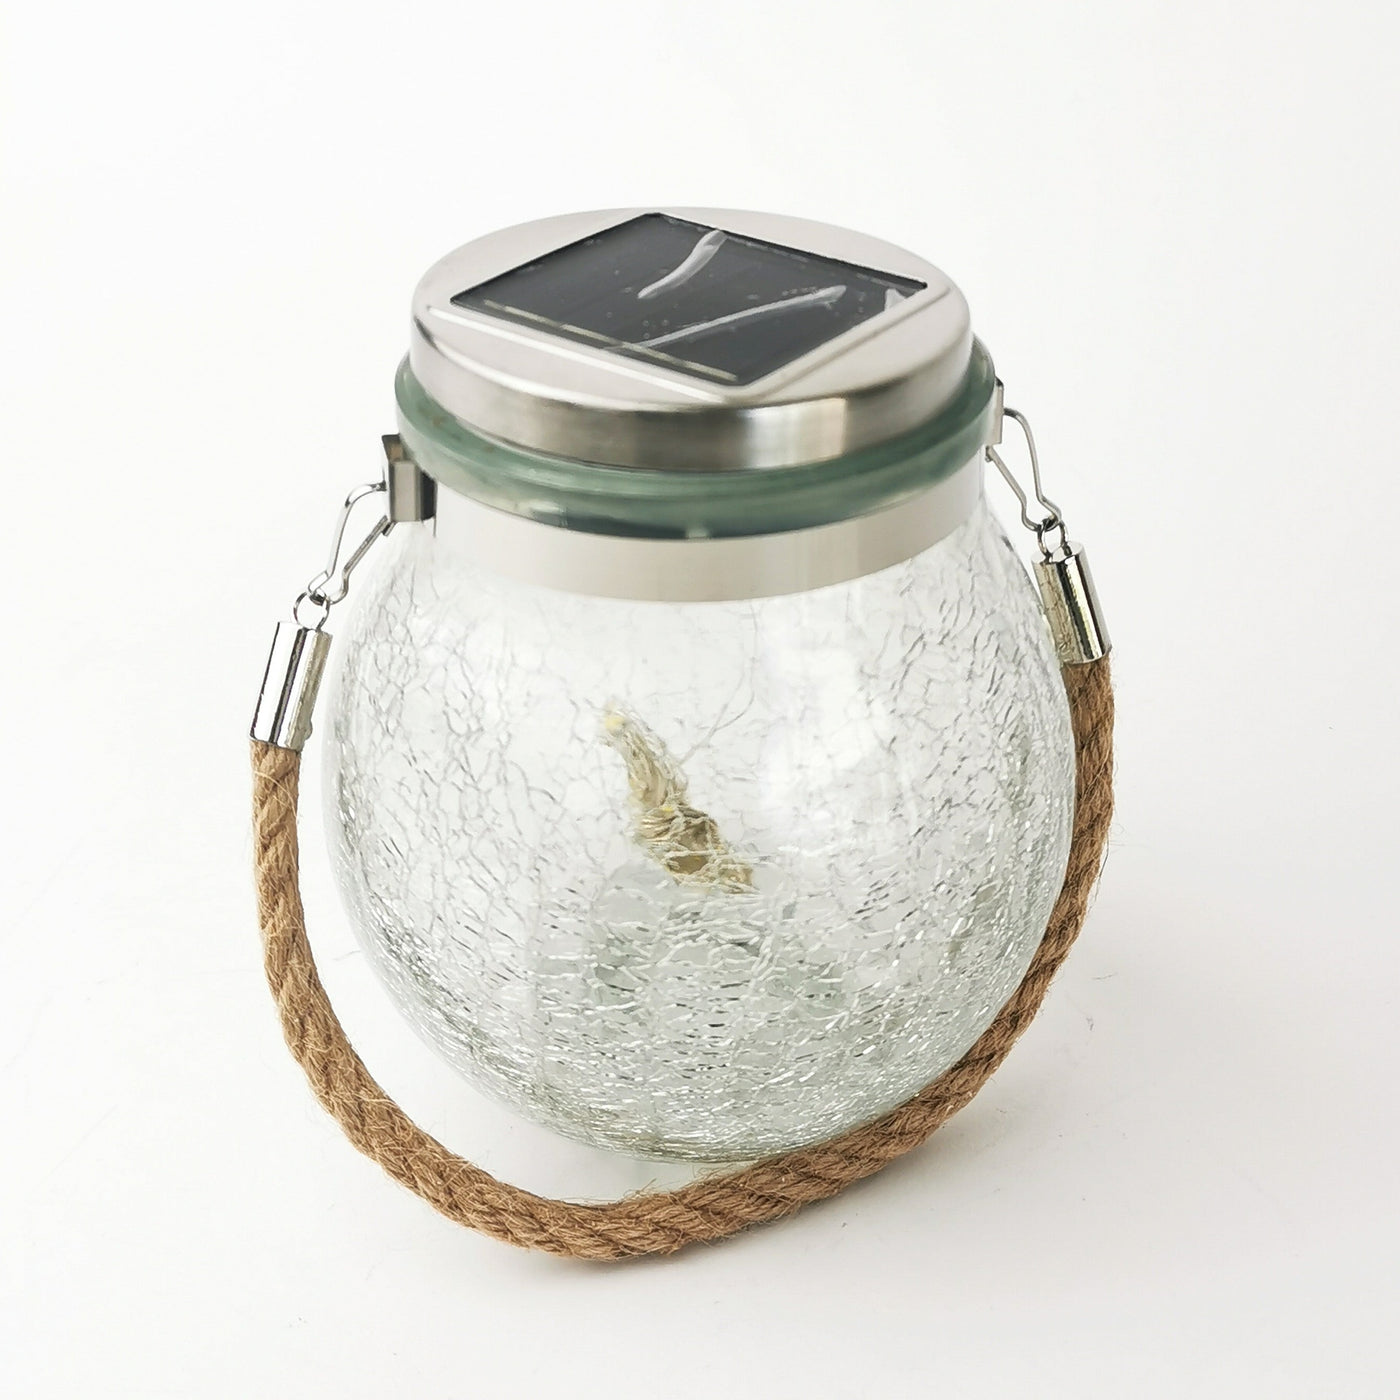 Solar Lantern from Love Your Lights